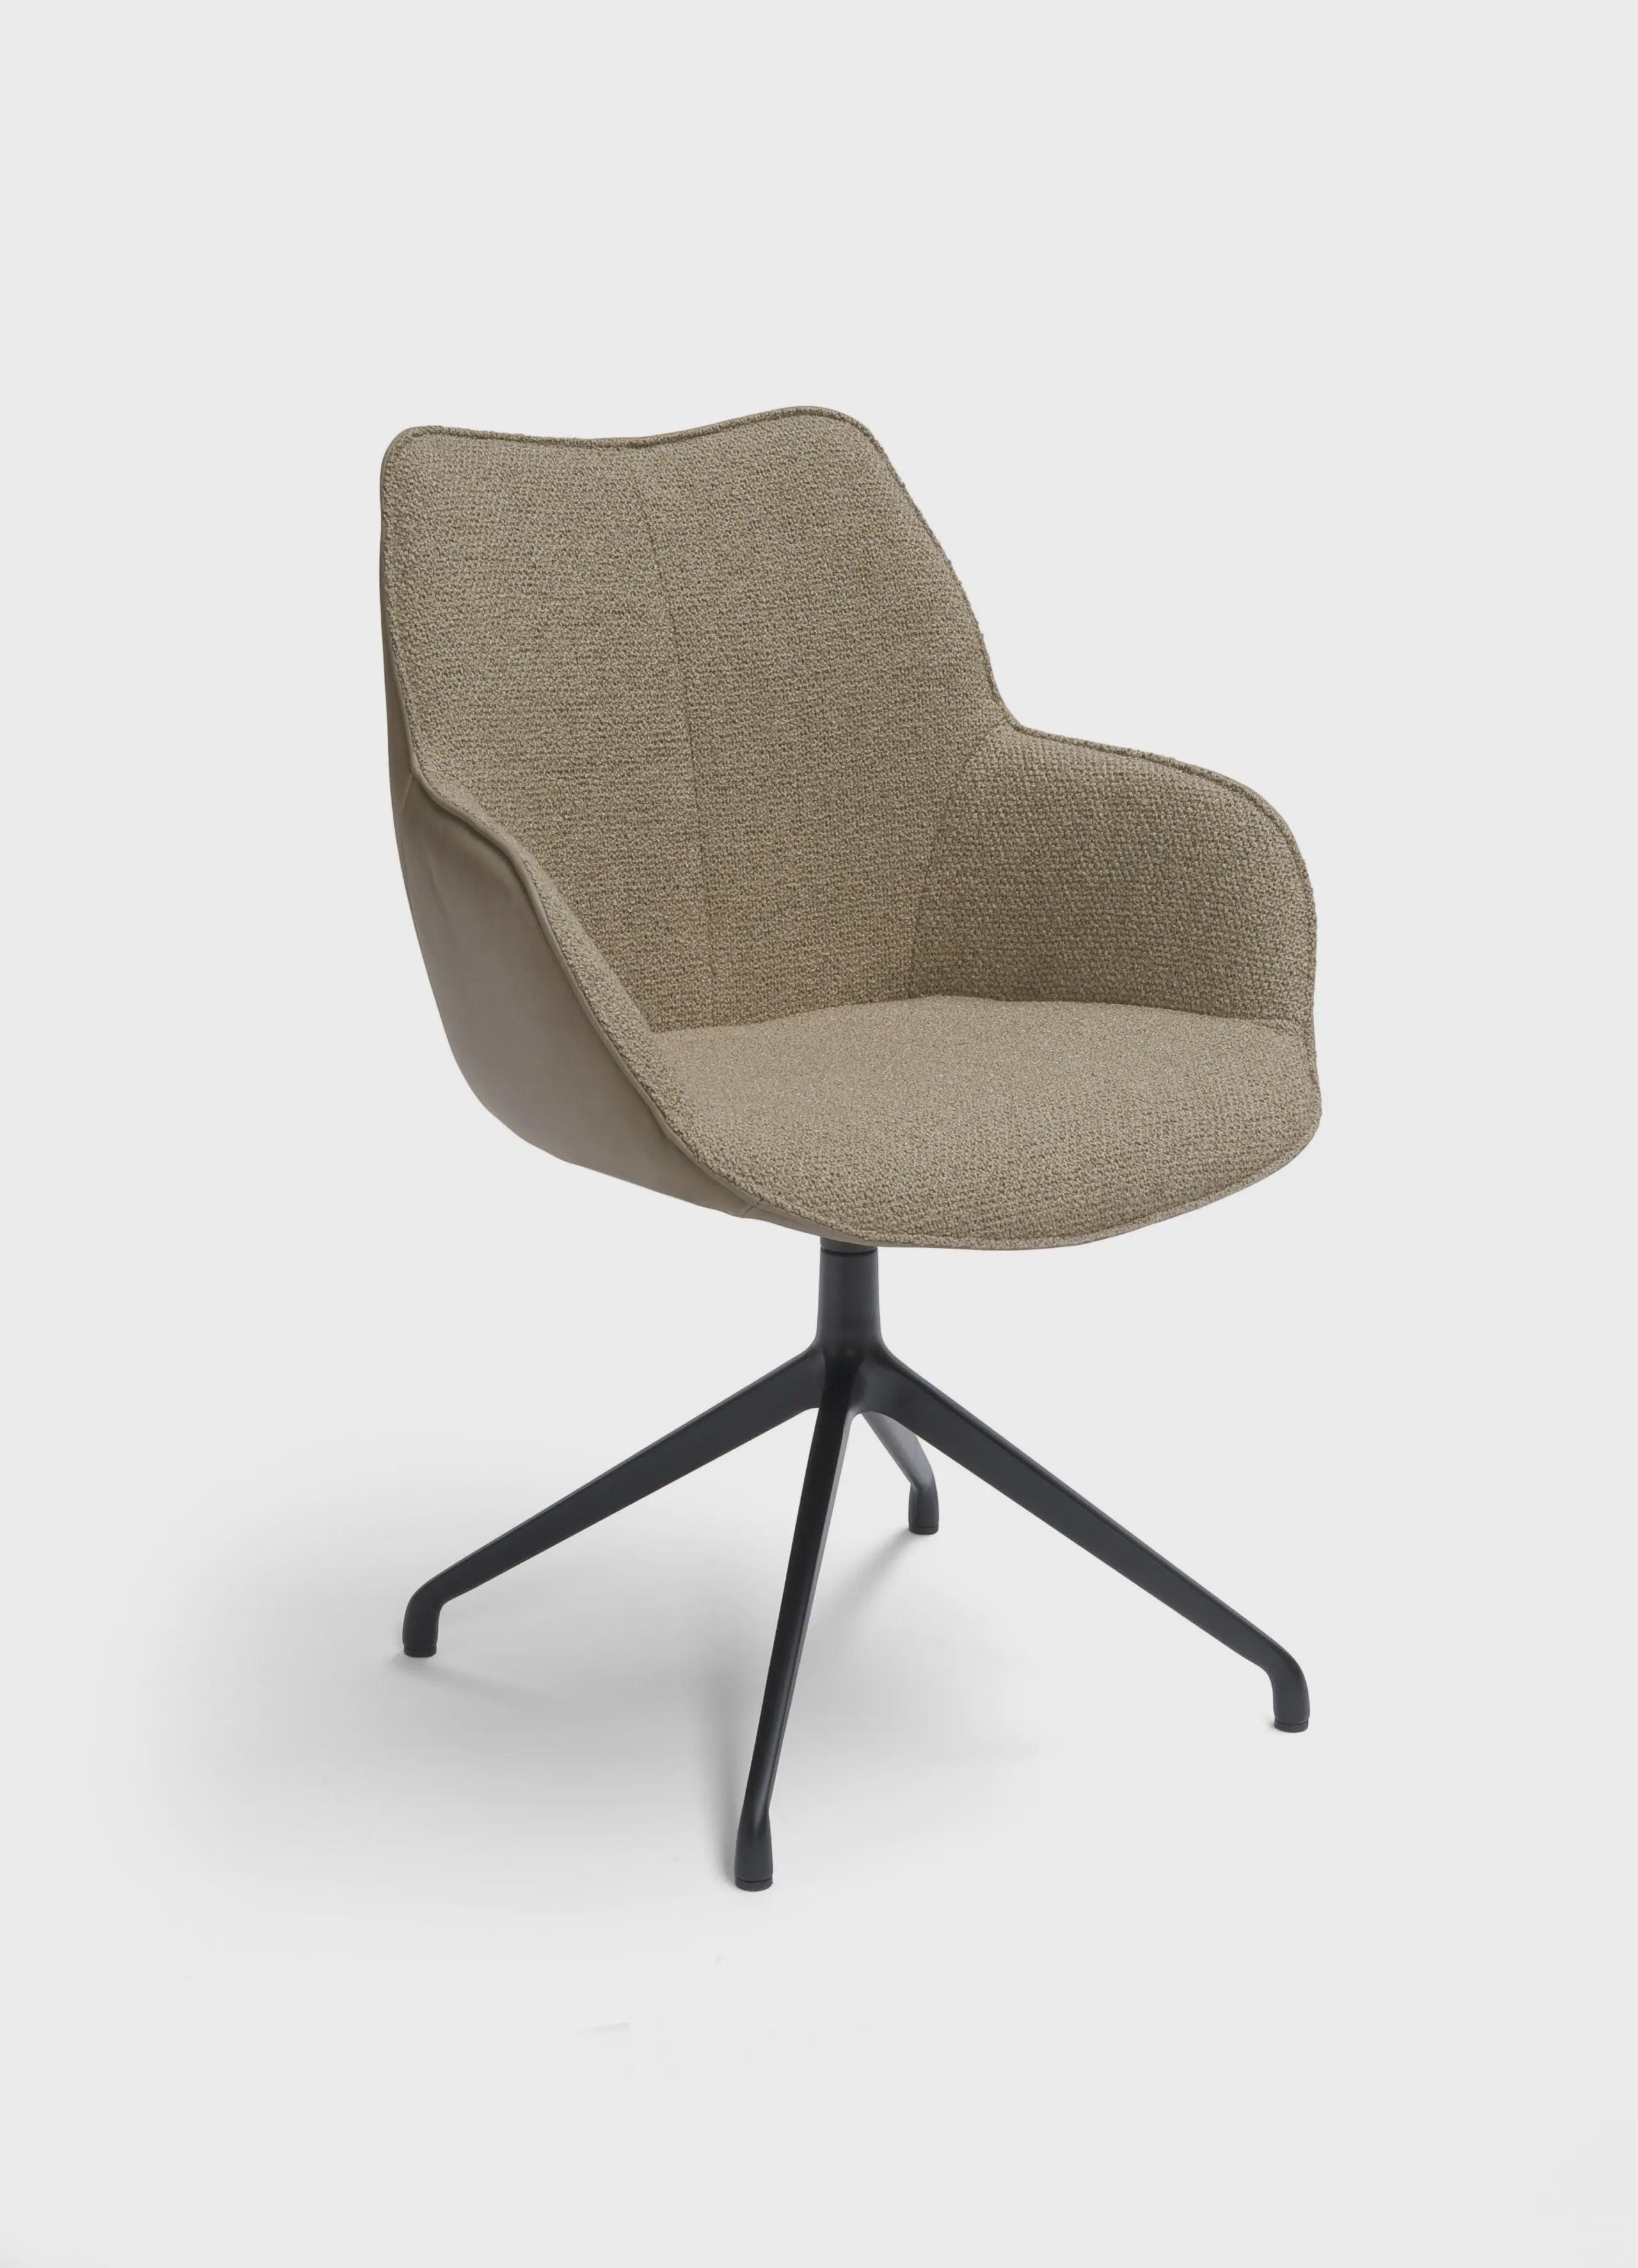 The Tilburg Dining Chair with Arms